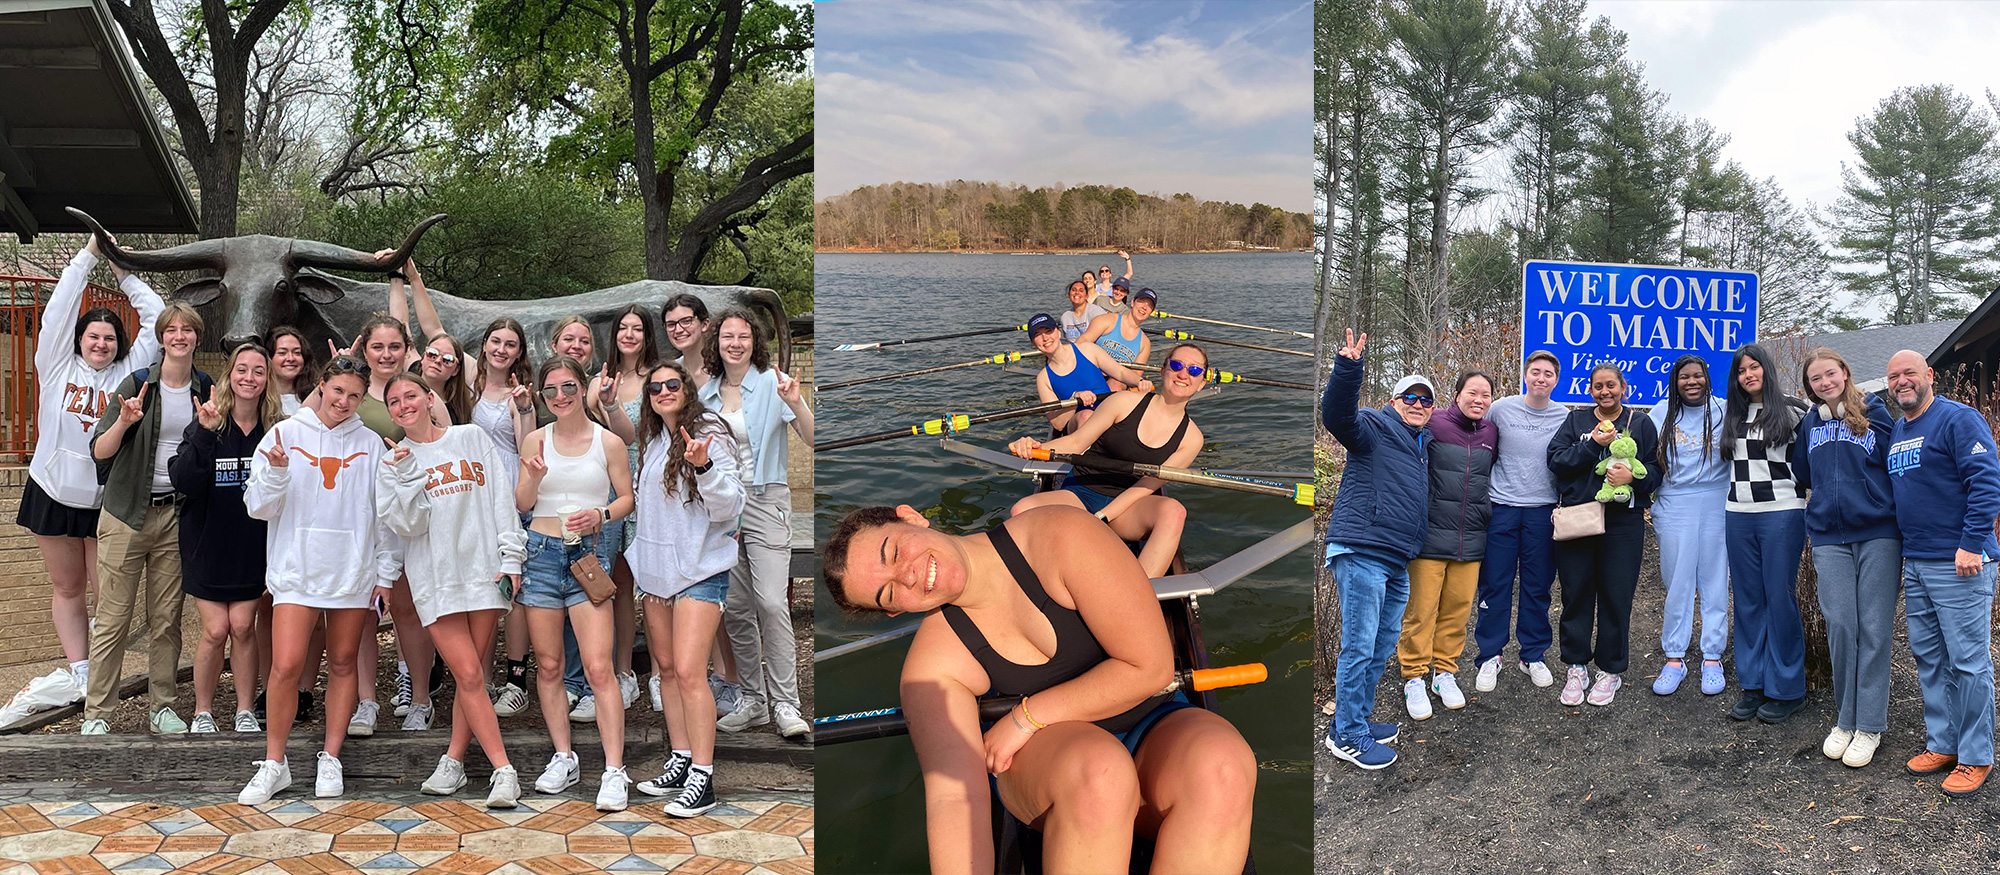 From left to right: Mount Holyoke lacrosse in Austin, Texas (Annie O'Byrne); Mount Holyoke rowing in Clemson, S.C. (Tobin Mayo-Kiely); Mount Holyoke tennis on the road in Maine during the teams' respective spring break trips.